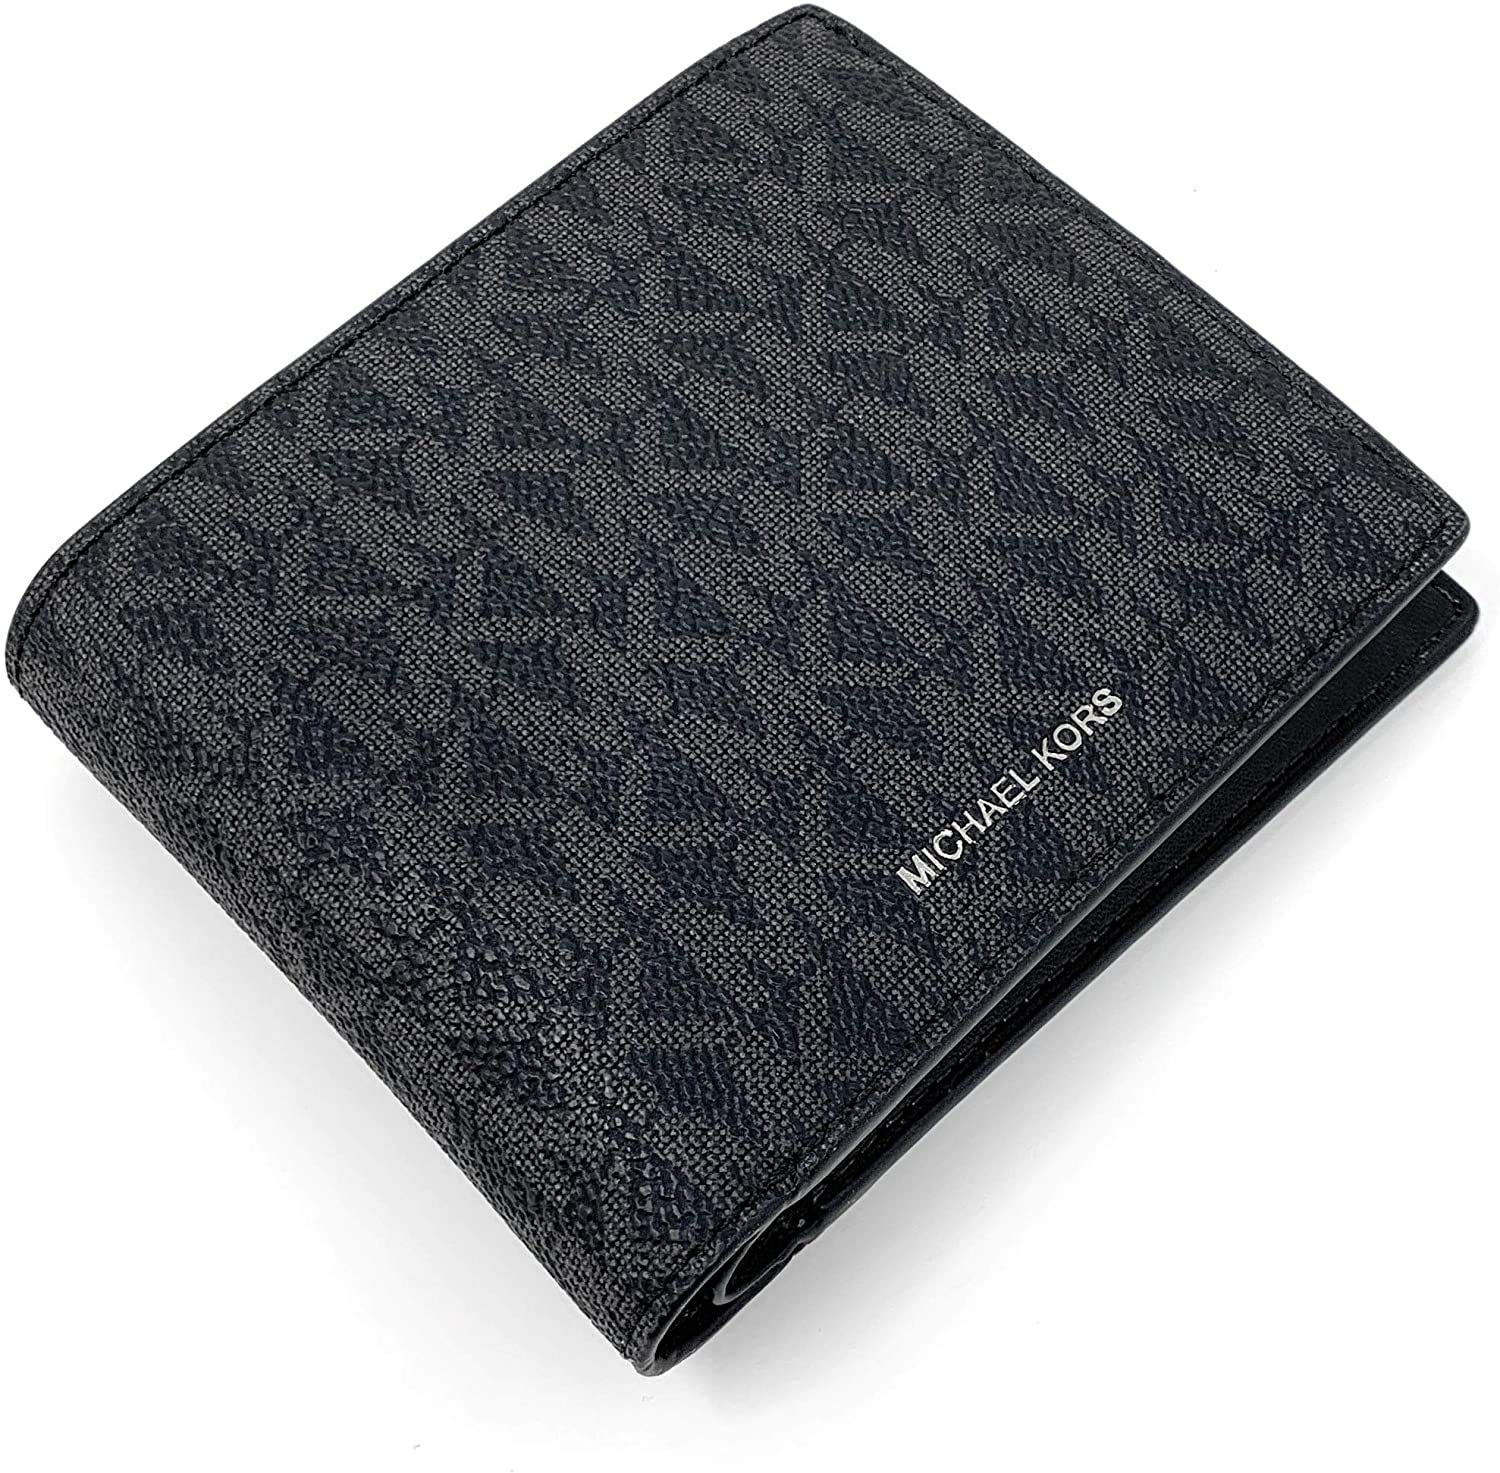 MICHAEL KORS COOPER BILLFOLD WITH PASSCASE WALLET  Brands Got Signature By  An Kleh  YouTube